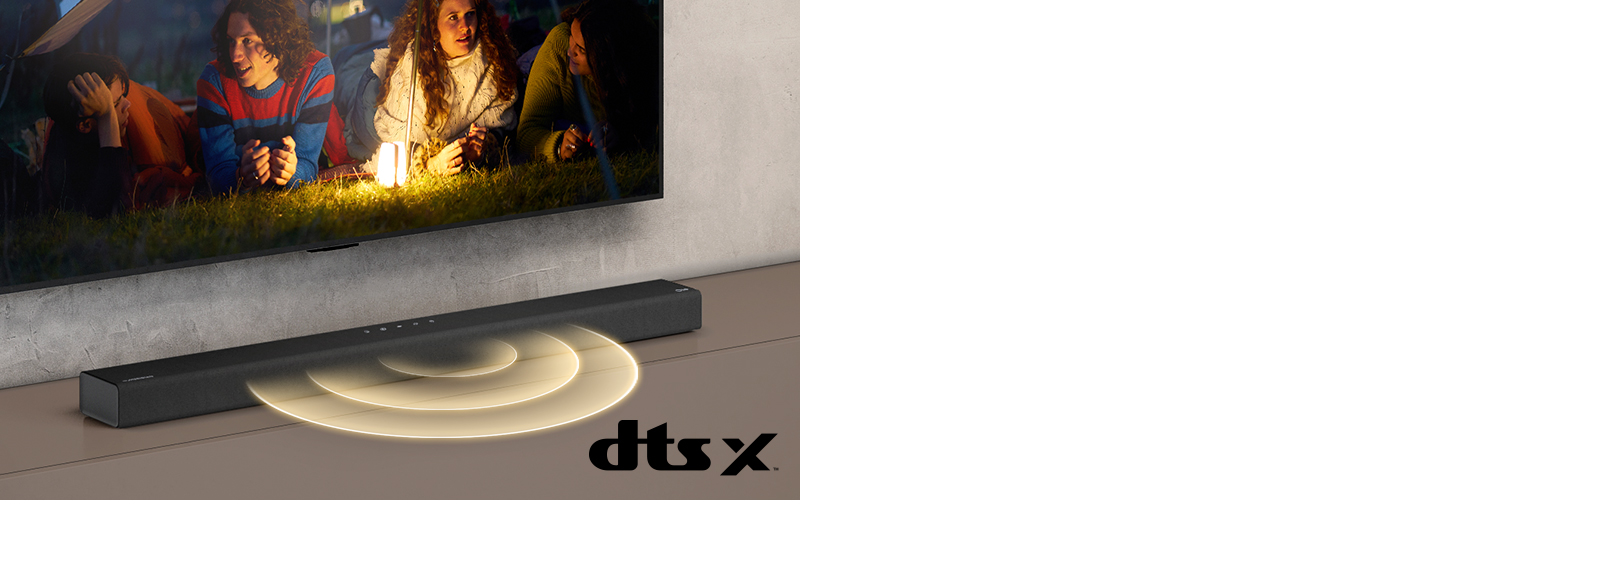 LG TV is on the wall, on the screen it shows 2 couples lying on the grass. In front of them, there is a lamp. LG Sound bar is below LG TV. Sound graphic is coming out from the front of the sound bar. DTS Virtual:X logo is shown on the bottom right corner of image.